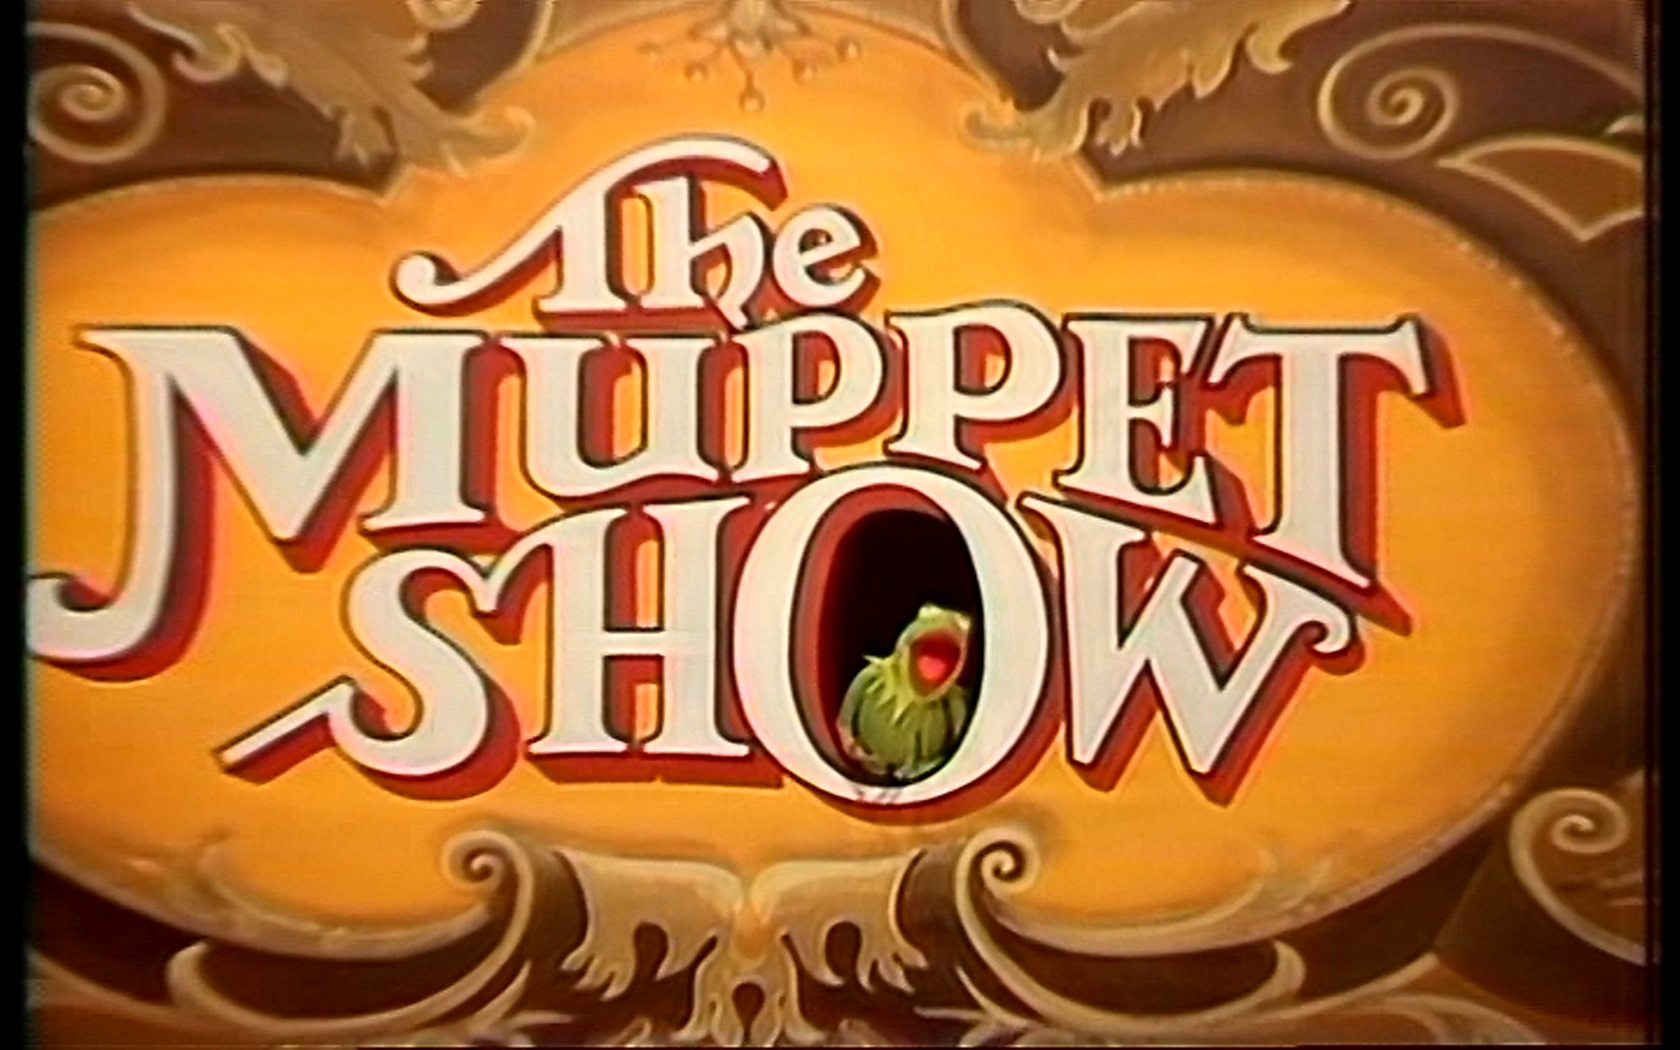 The Muppet Show #5